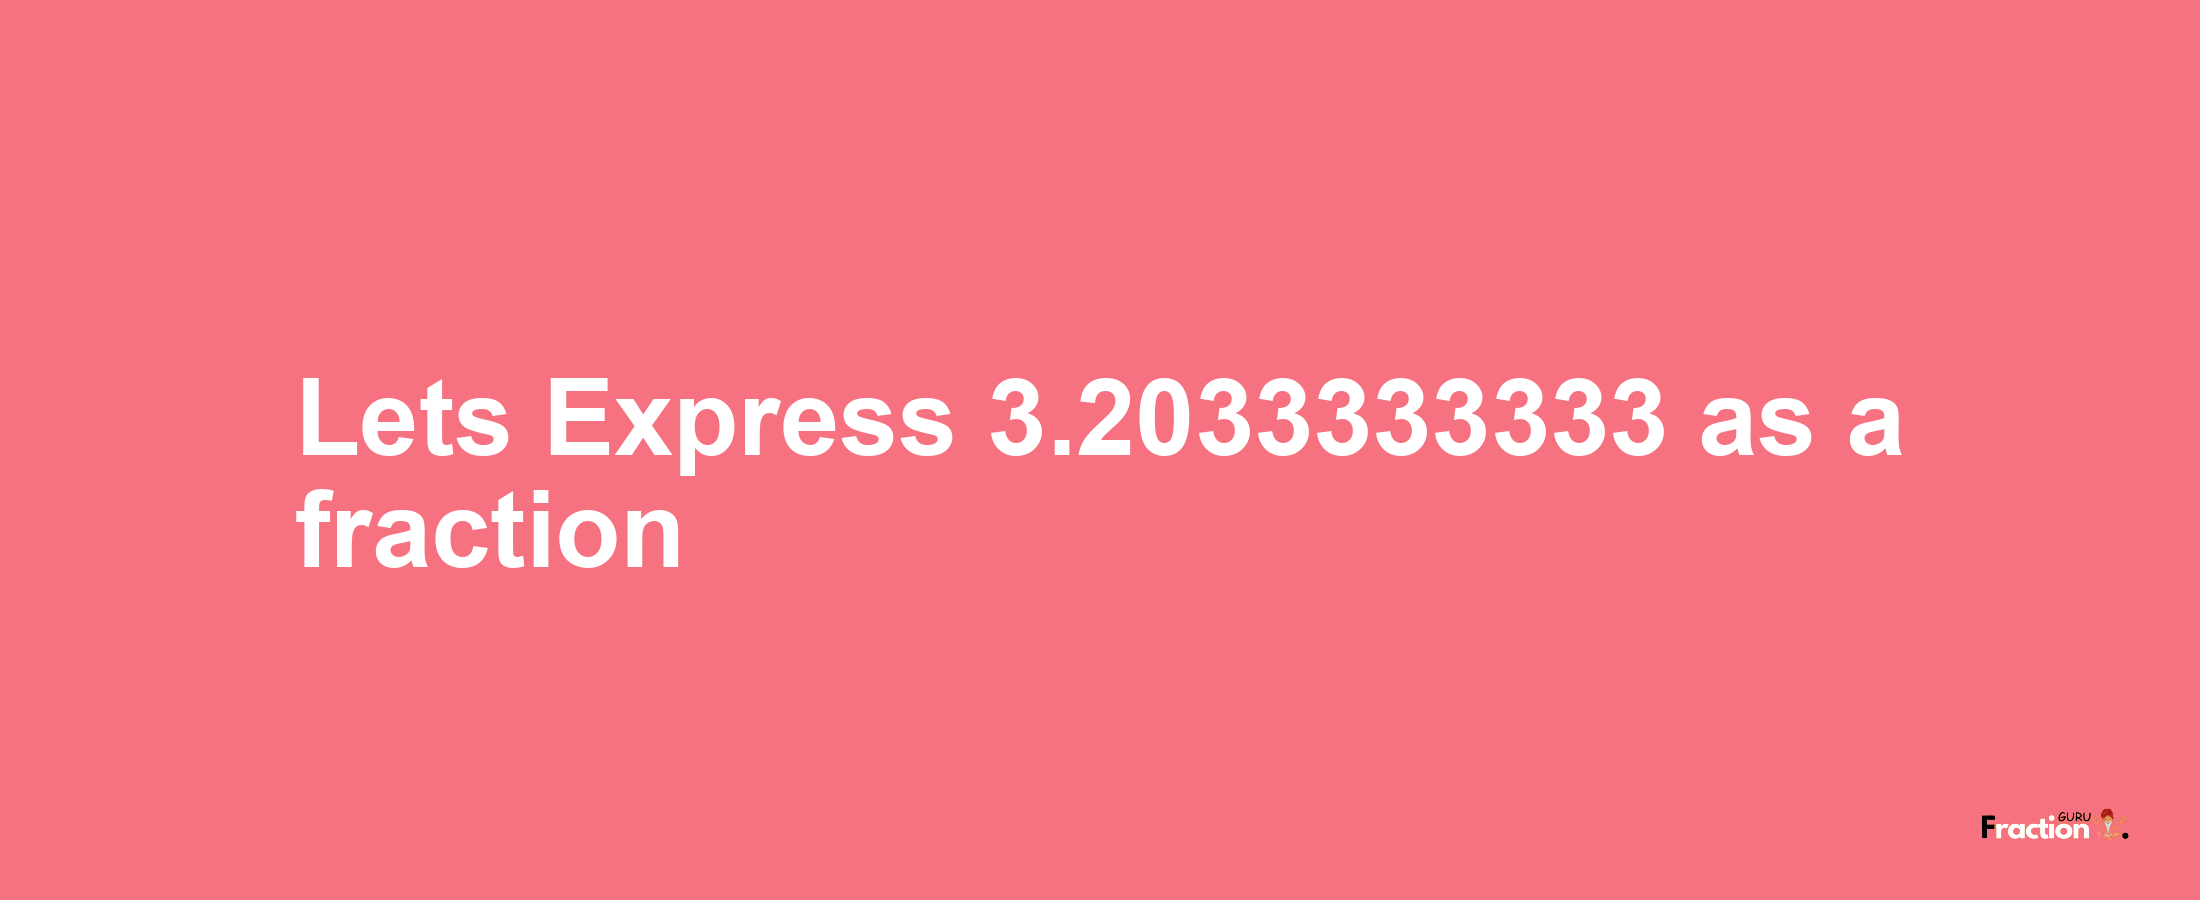 Lets Express 3.2033333333 as afraction